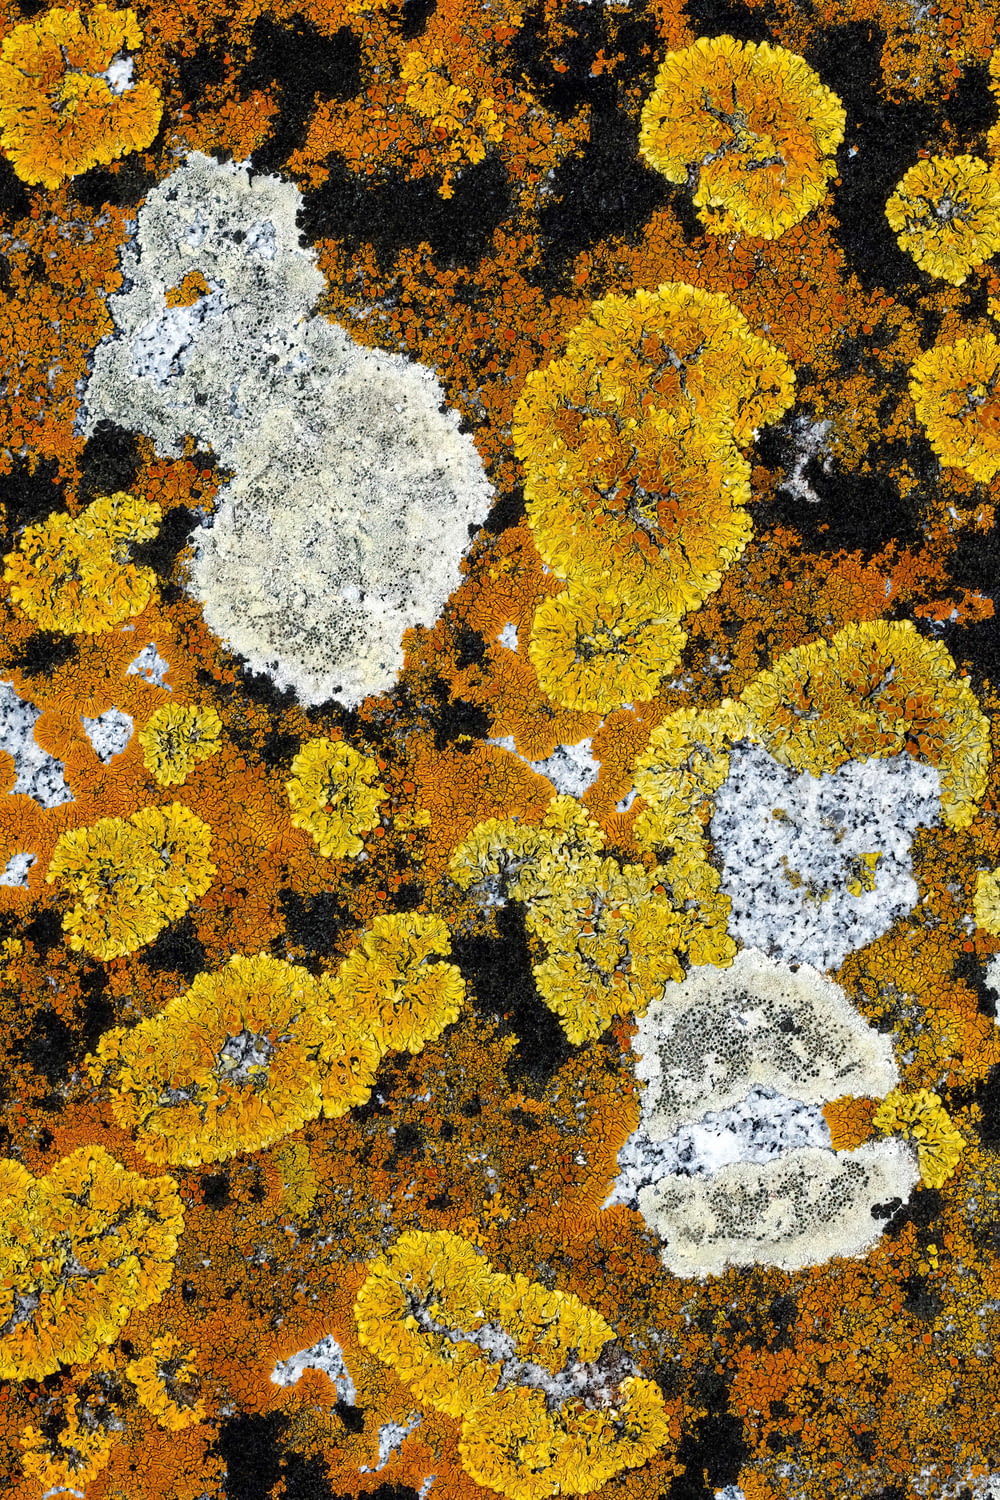 yellow and white lichens and moss growing on a rock